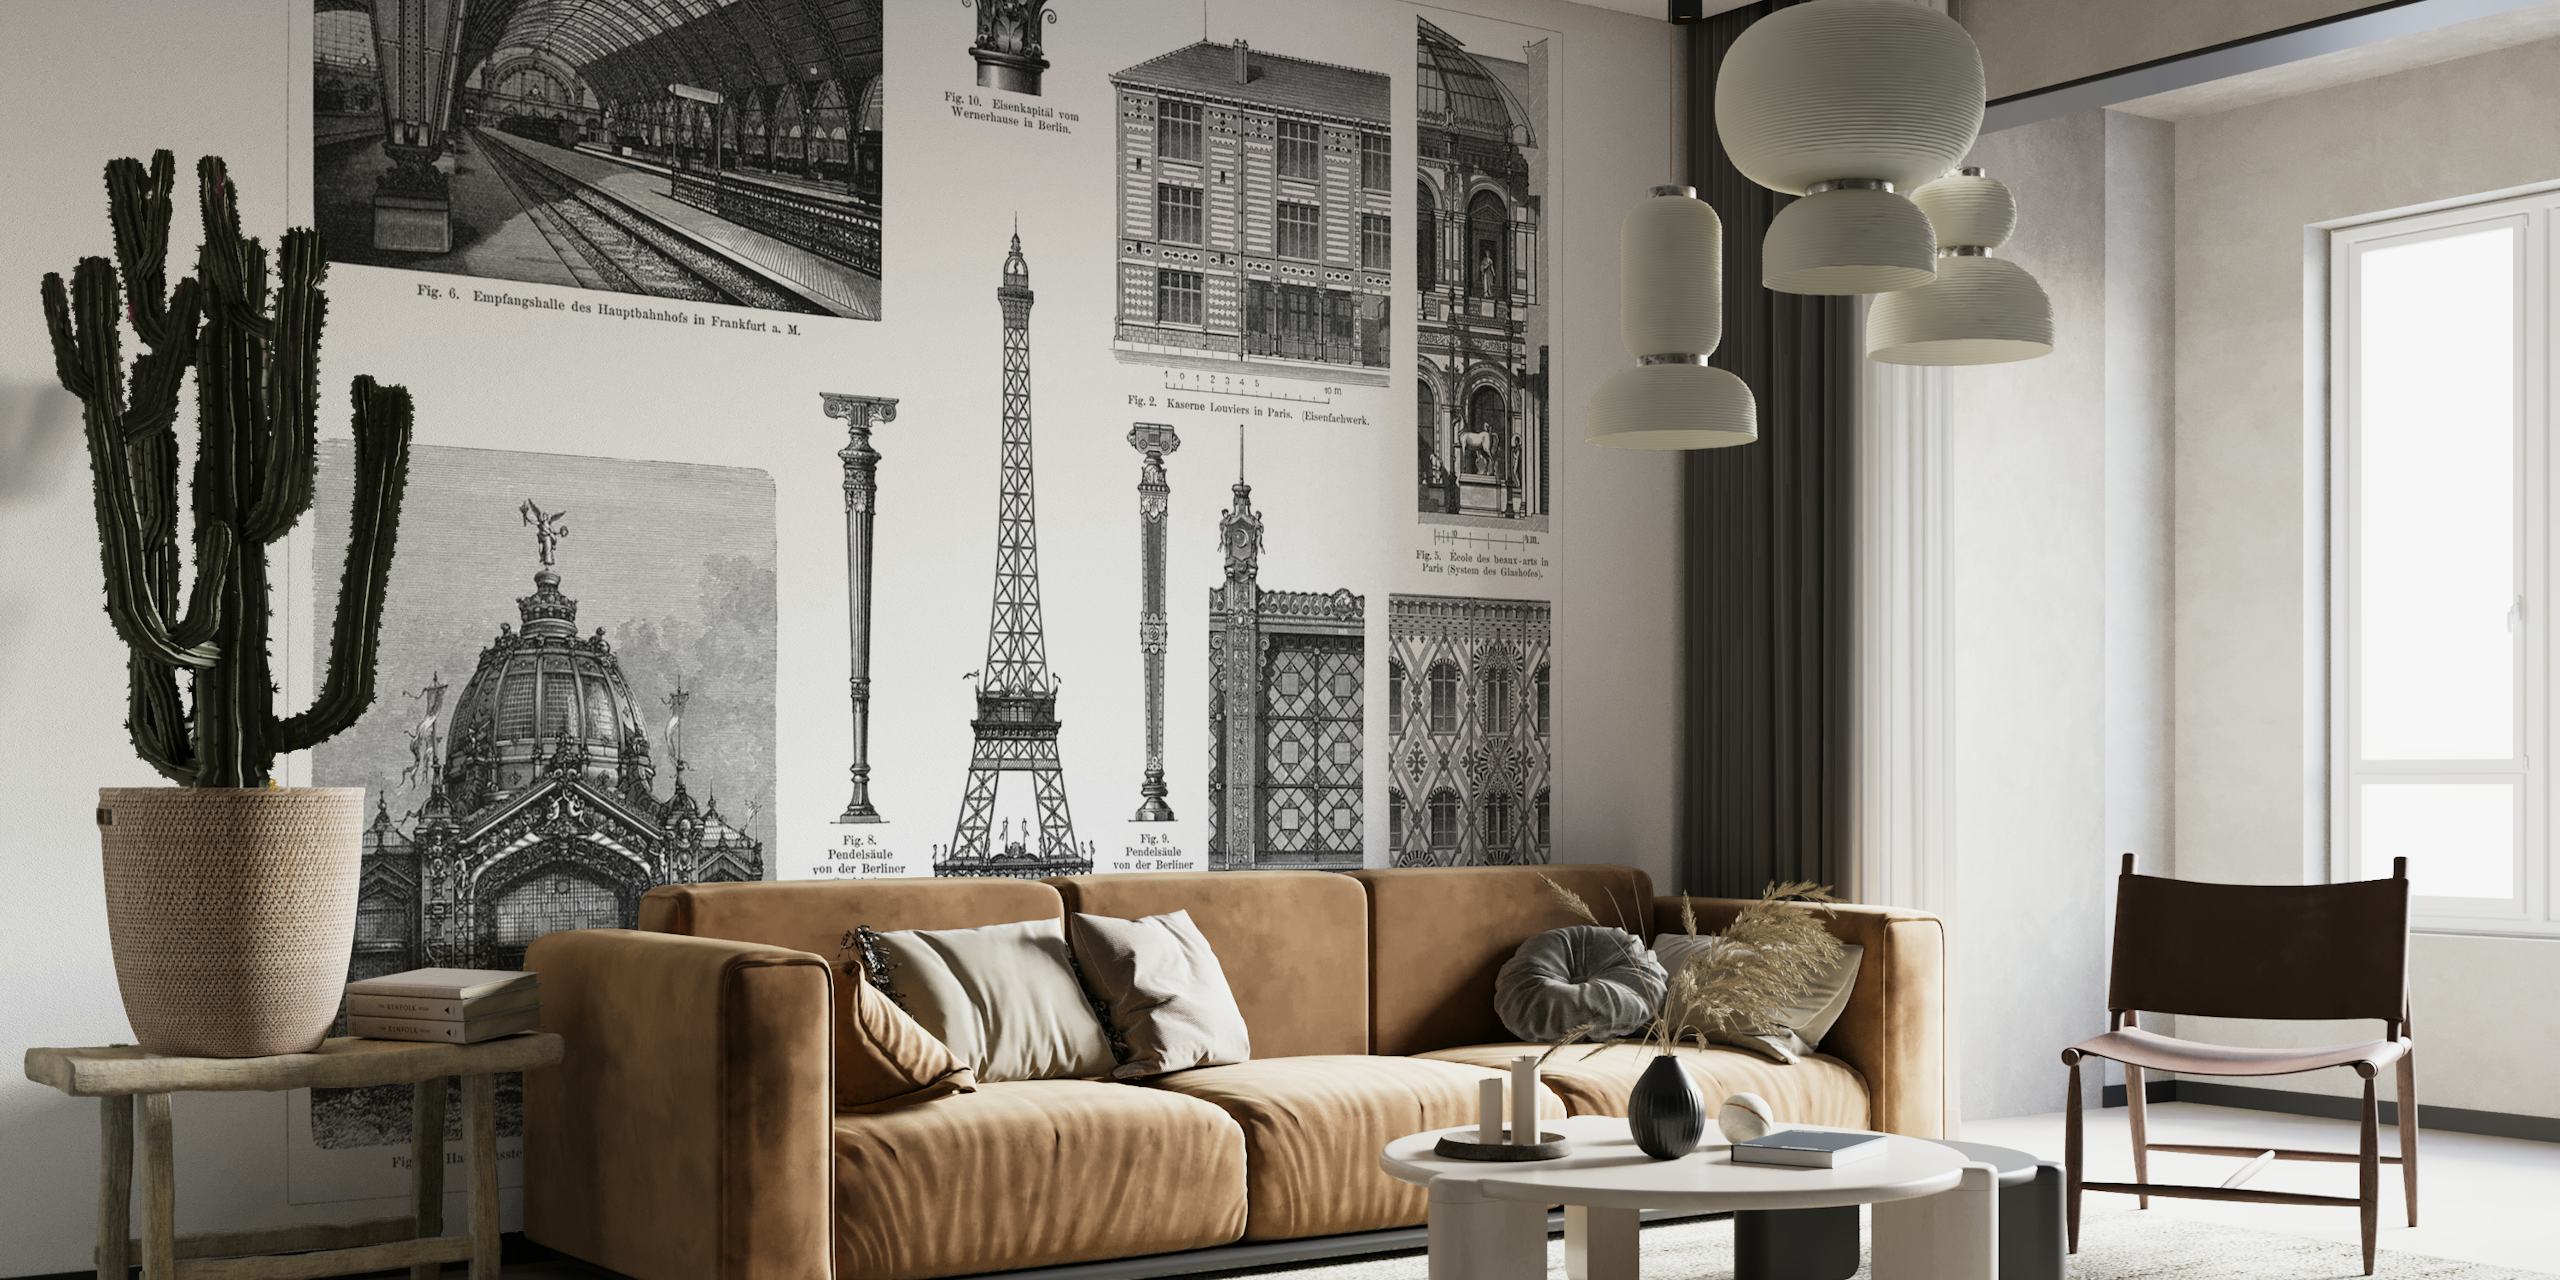 Black and white cast iron architectural designs wall mural featuring vintage illustrations of landmarks and structures.